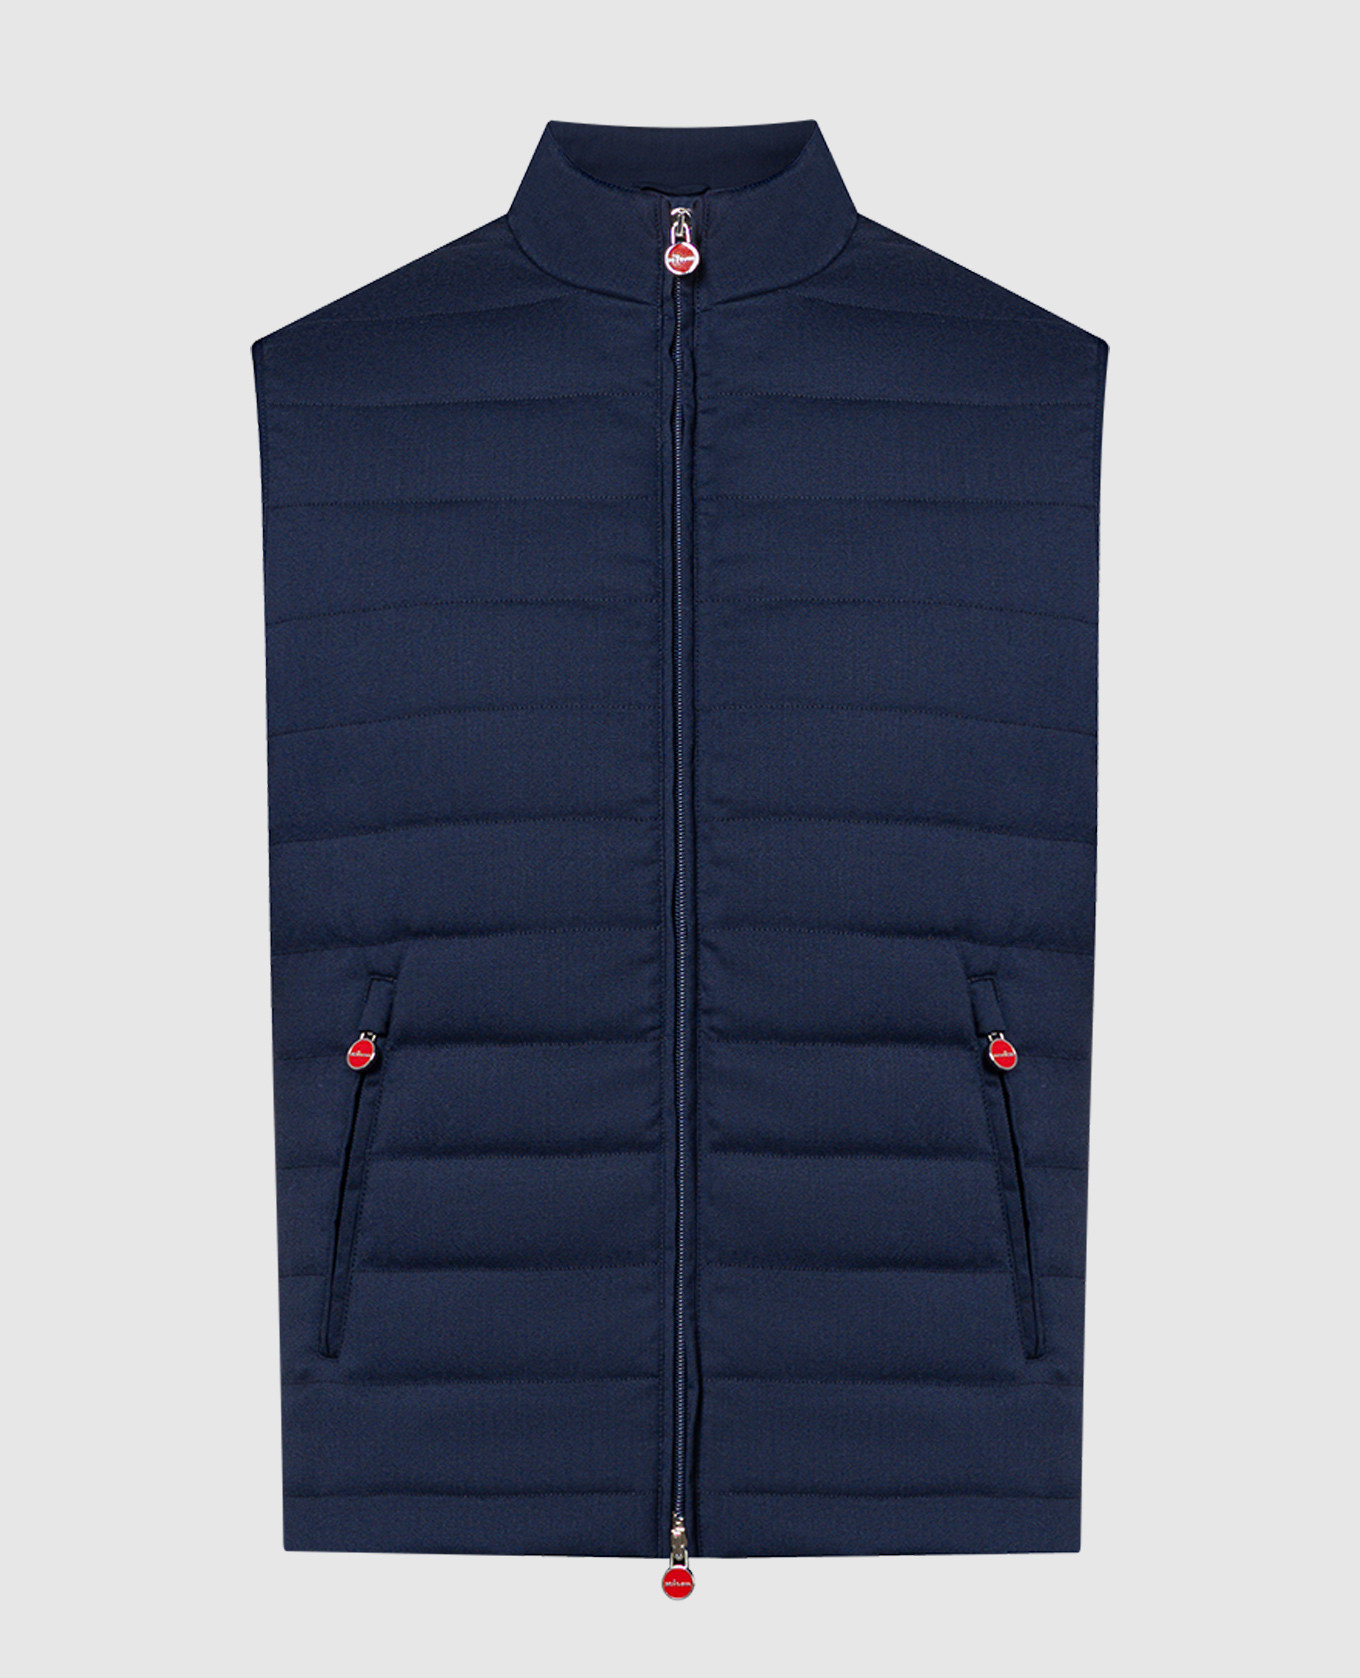 Blue quilted vest made of wool